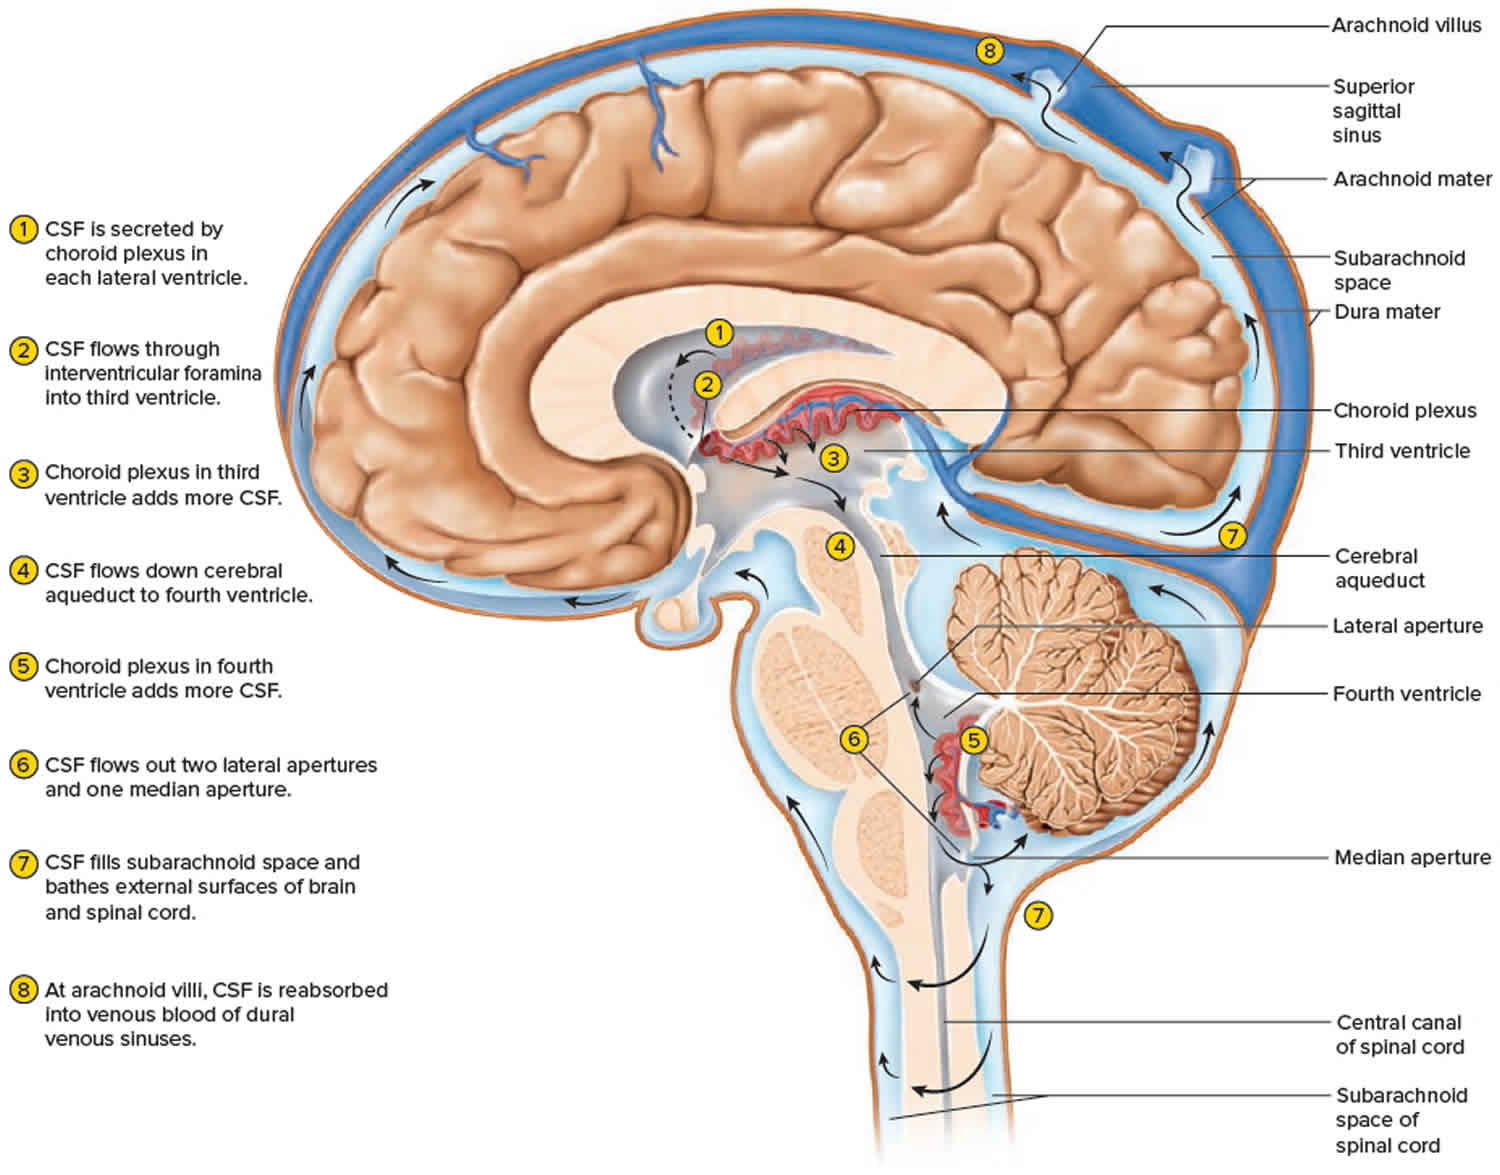 Cerebrospinal fluid formation and circulation in the brain